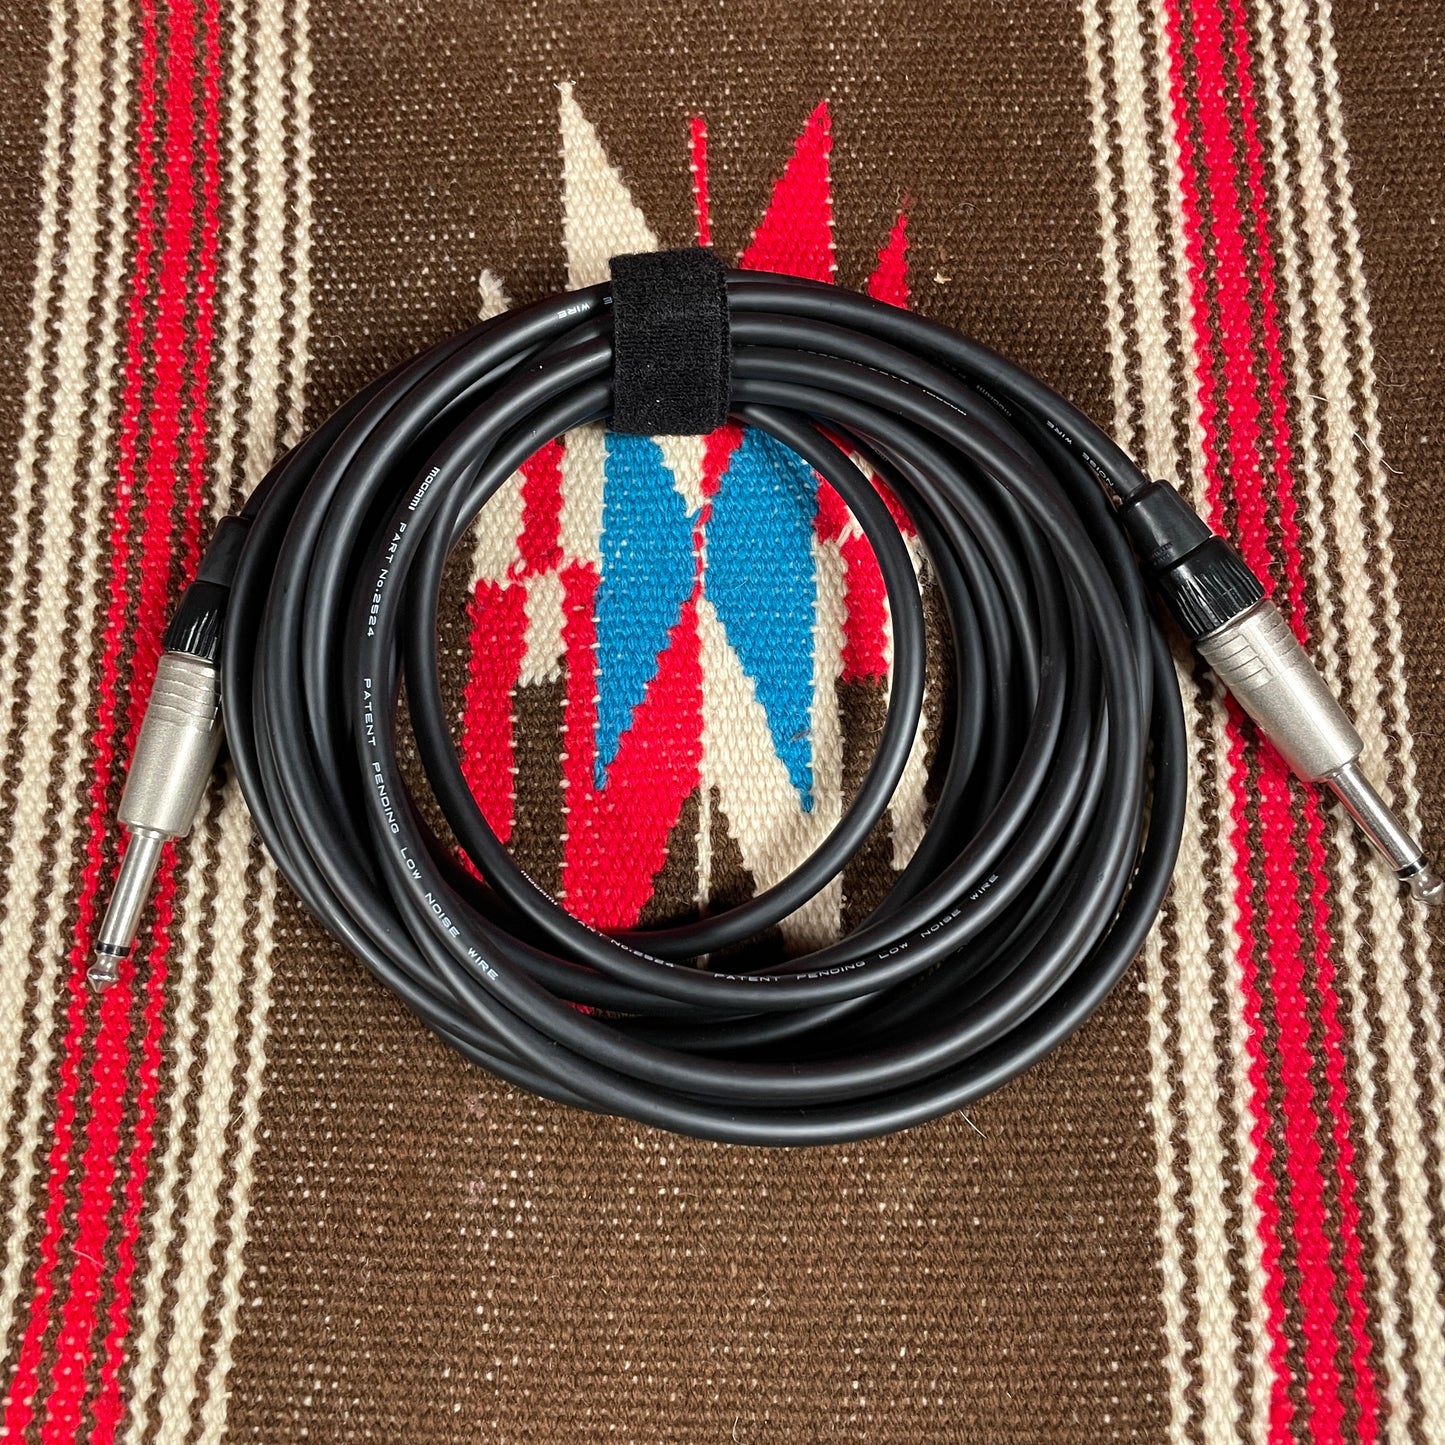 Mogami Instrument Cable 18 Foot Straight to Straight